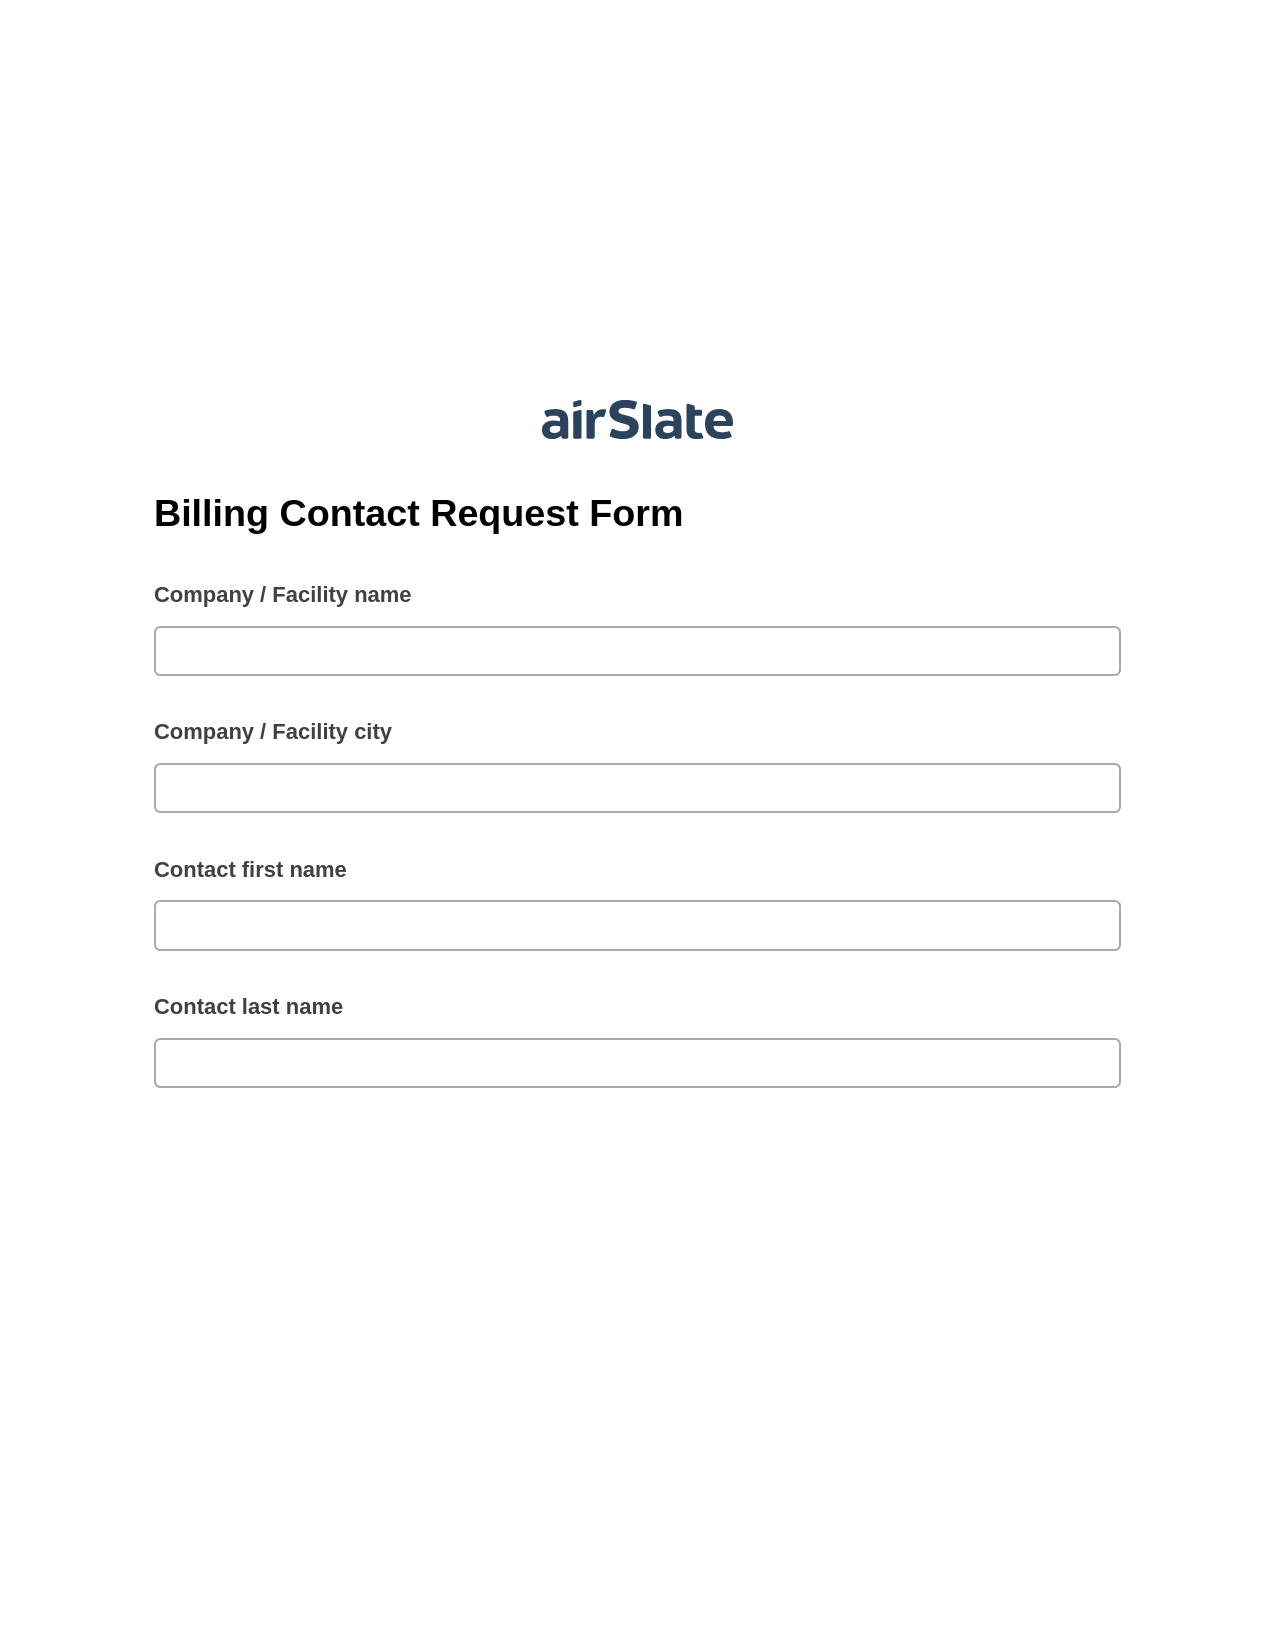 Multirole Billing Contact Request Form Pre-fill Slate from MS Dynamics 365 Records Bot, Export to MS Dynamics 365 Bot, OneDrive Bot